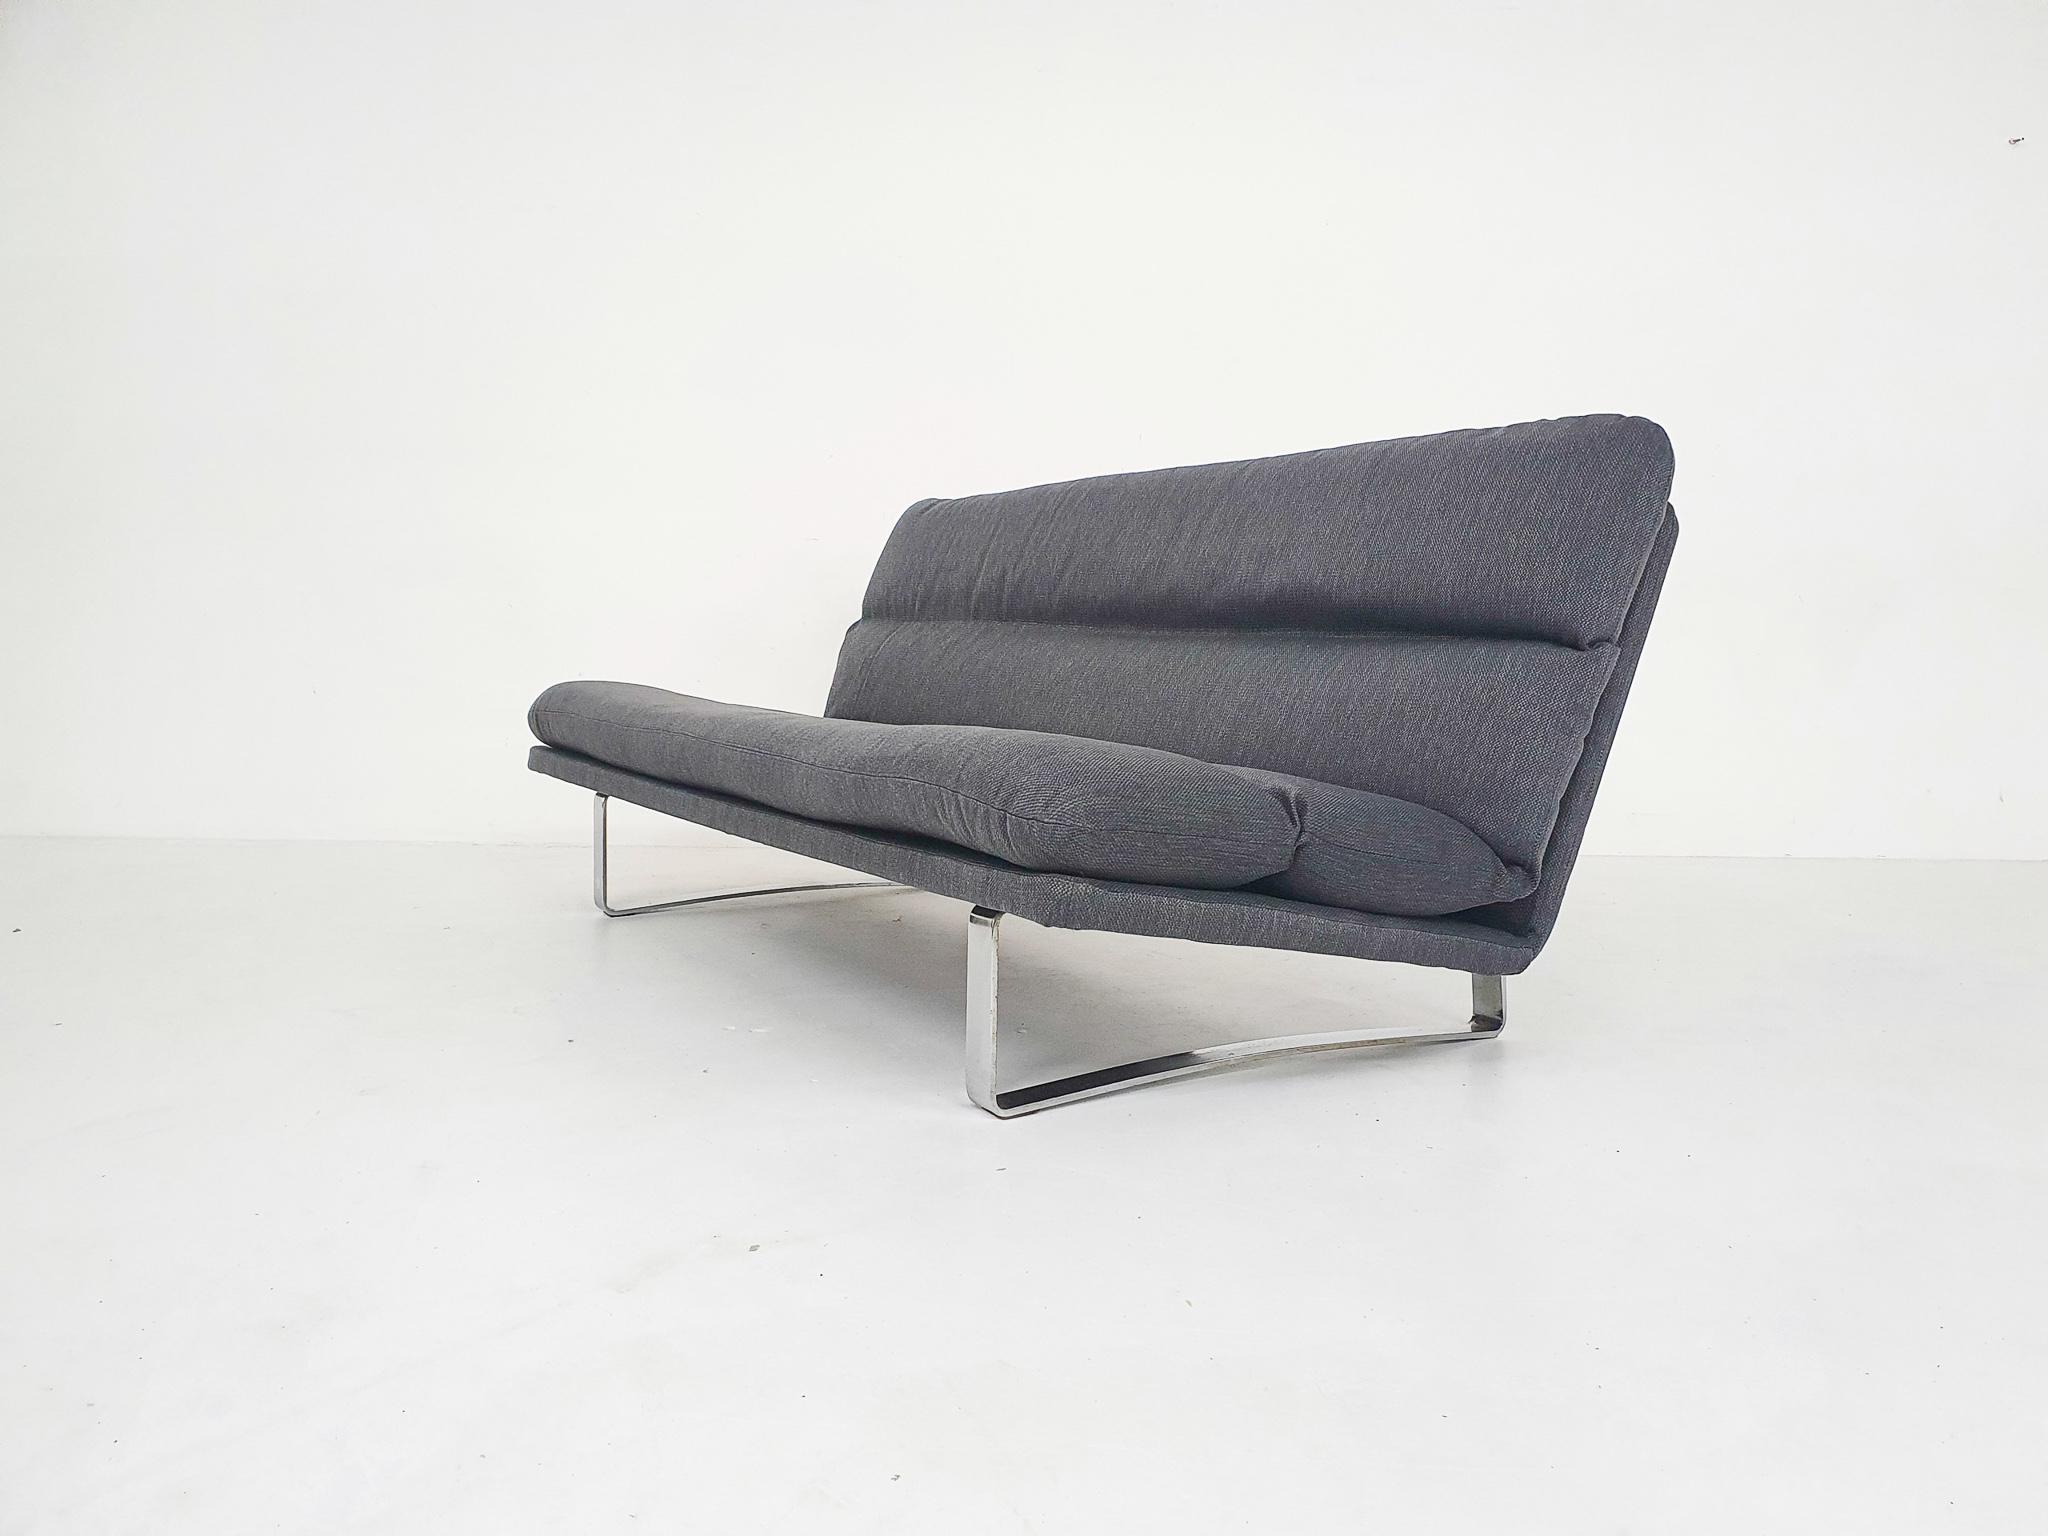 Silver feet and new upholstered frame and cushion in grey fabric.
Kho Liang Ie (1927-1975) was a Dutch industrial designer. He studied at Rietveld Academy and worked for Artifort, Fristho, Bruynzeel en Mosa. He is known for furnishing Airport